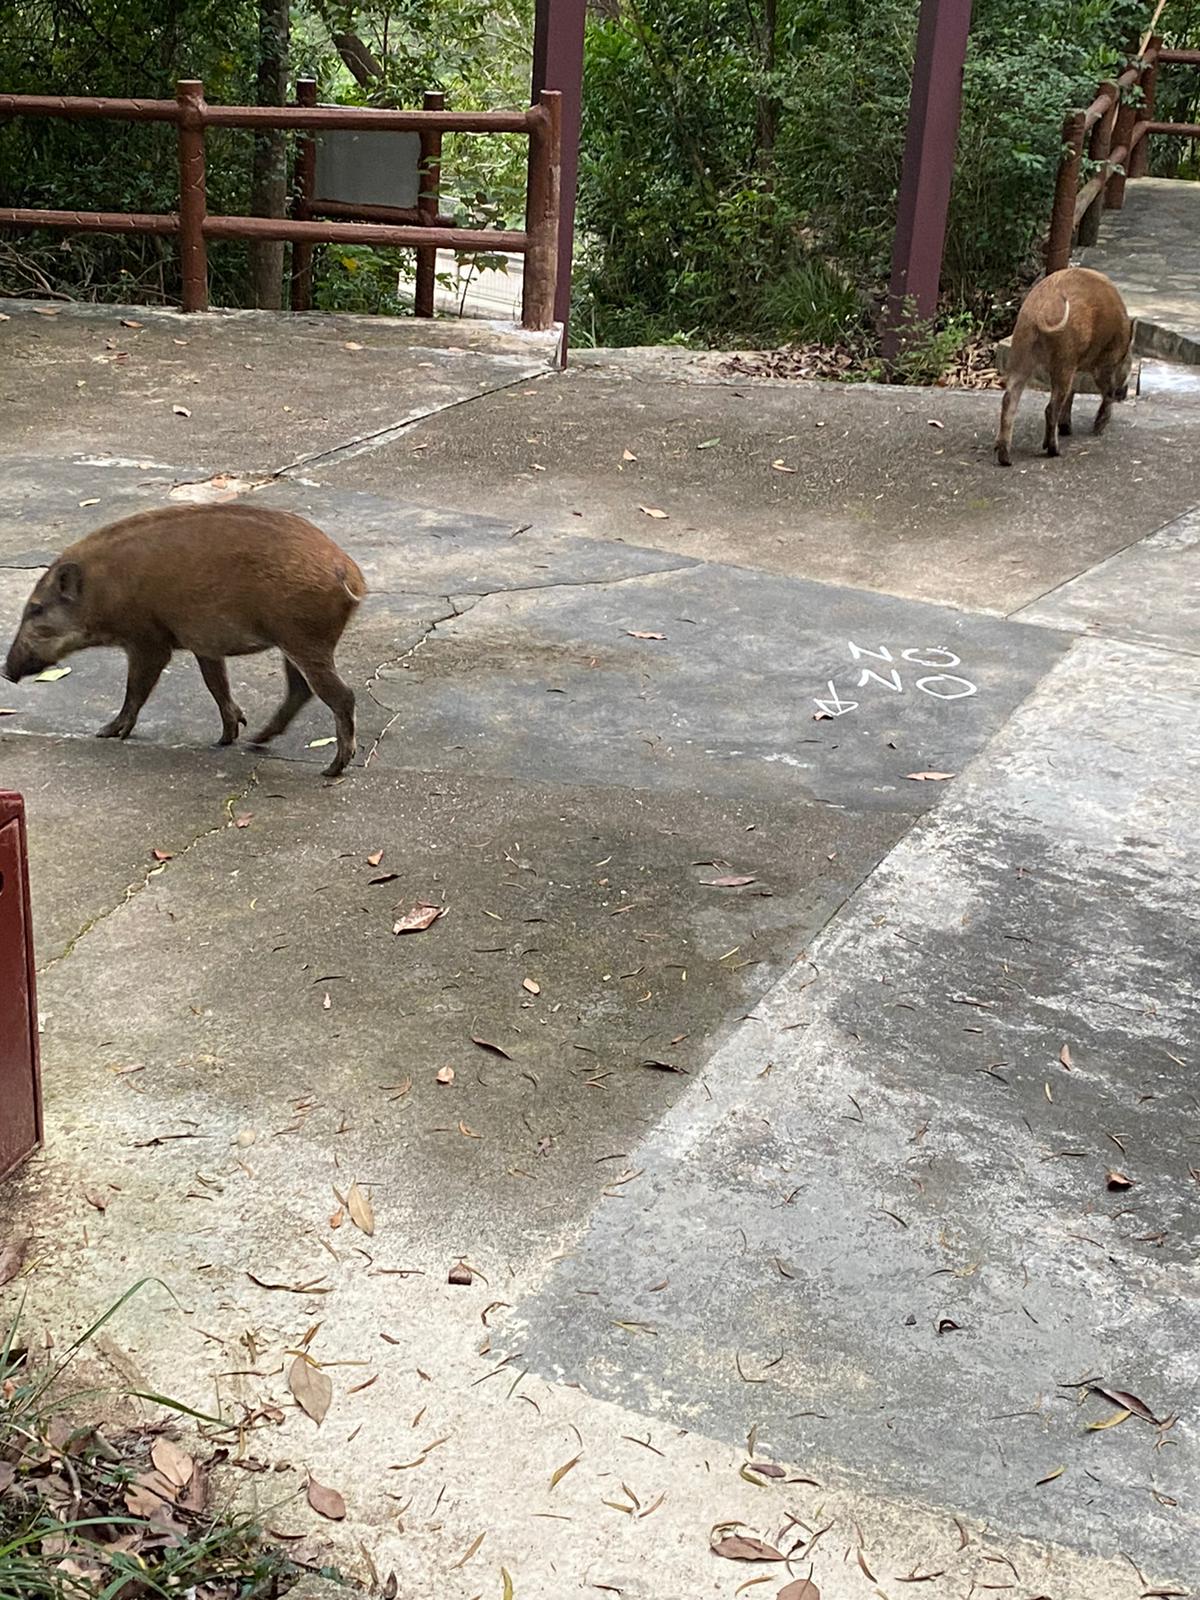 Enter the PIGS